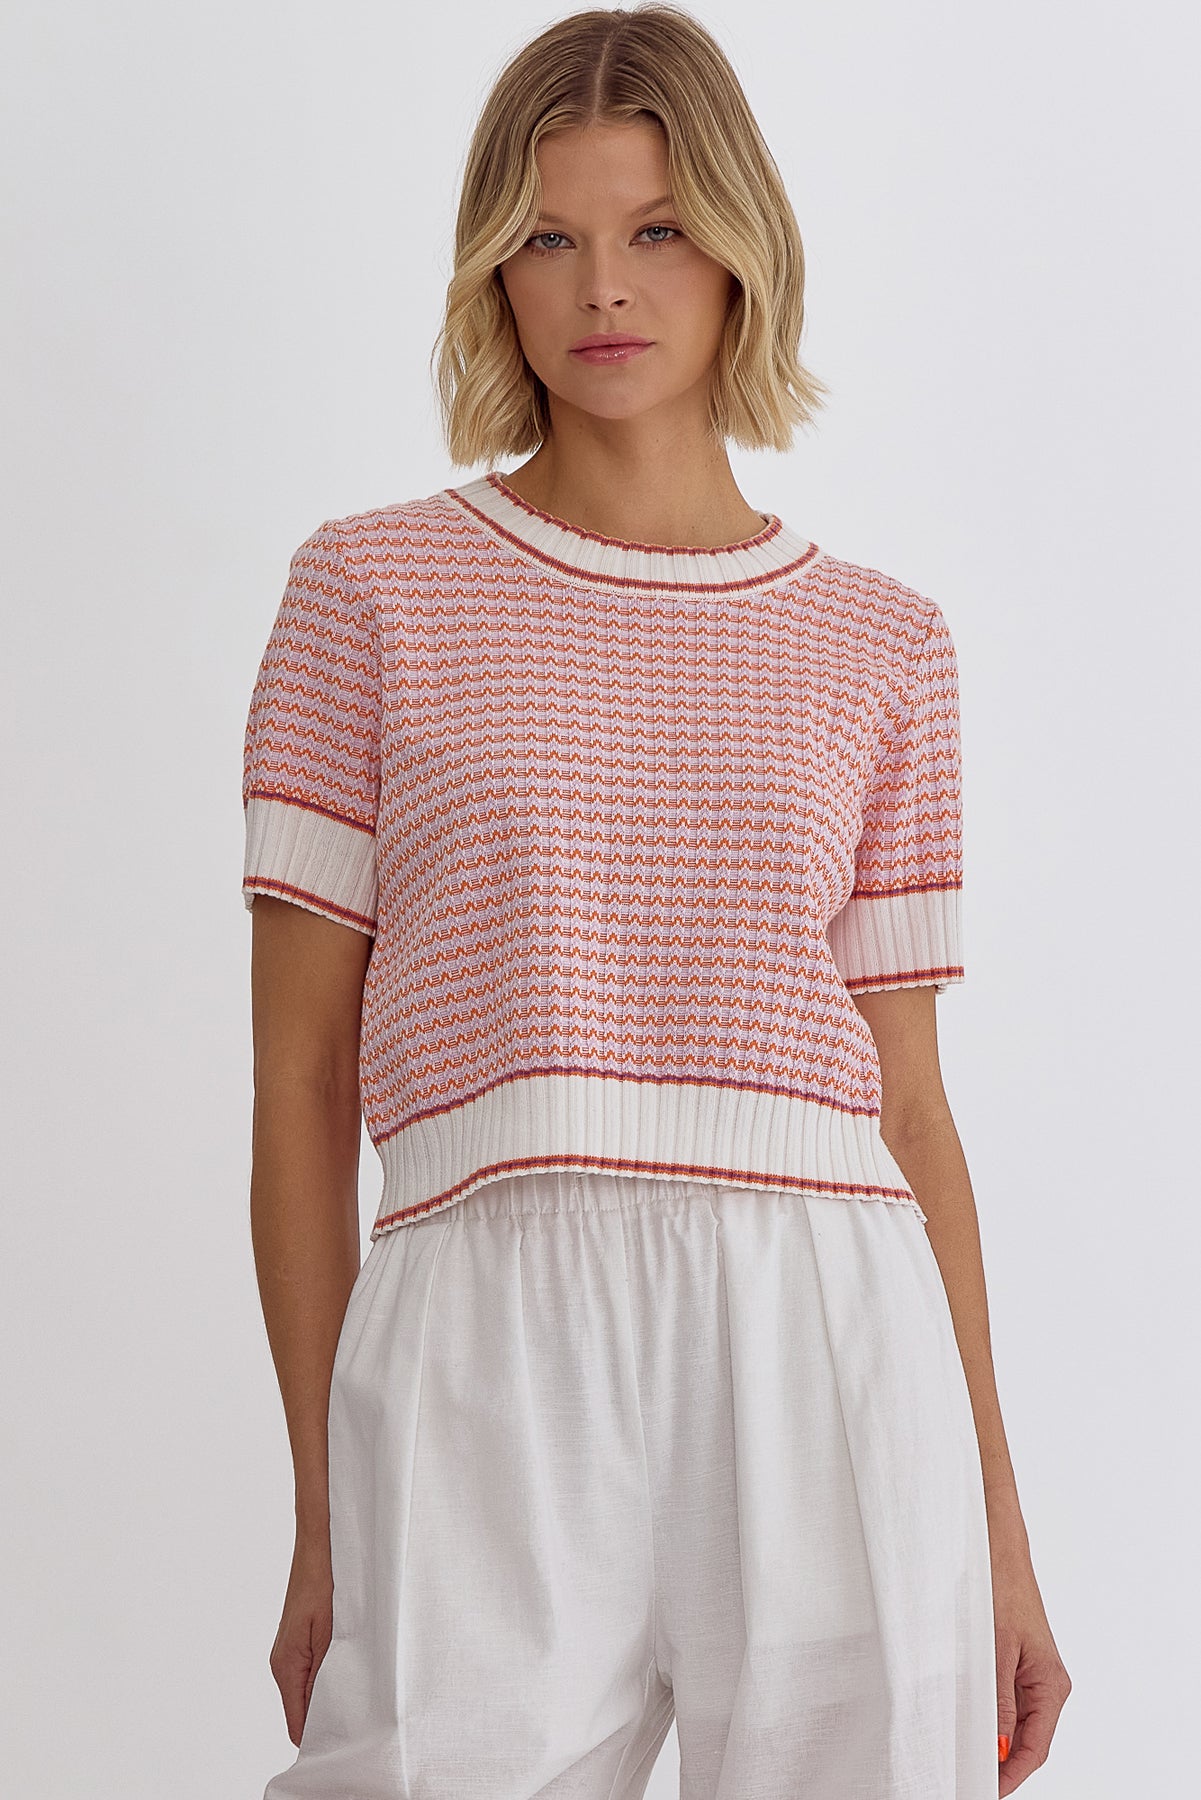 The Ava Knit Top